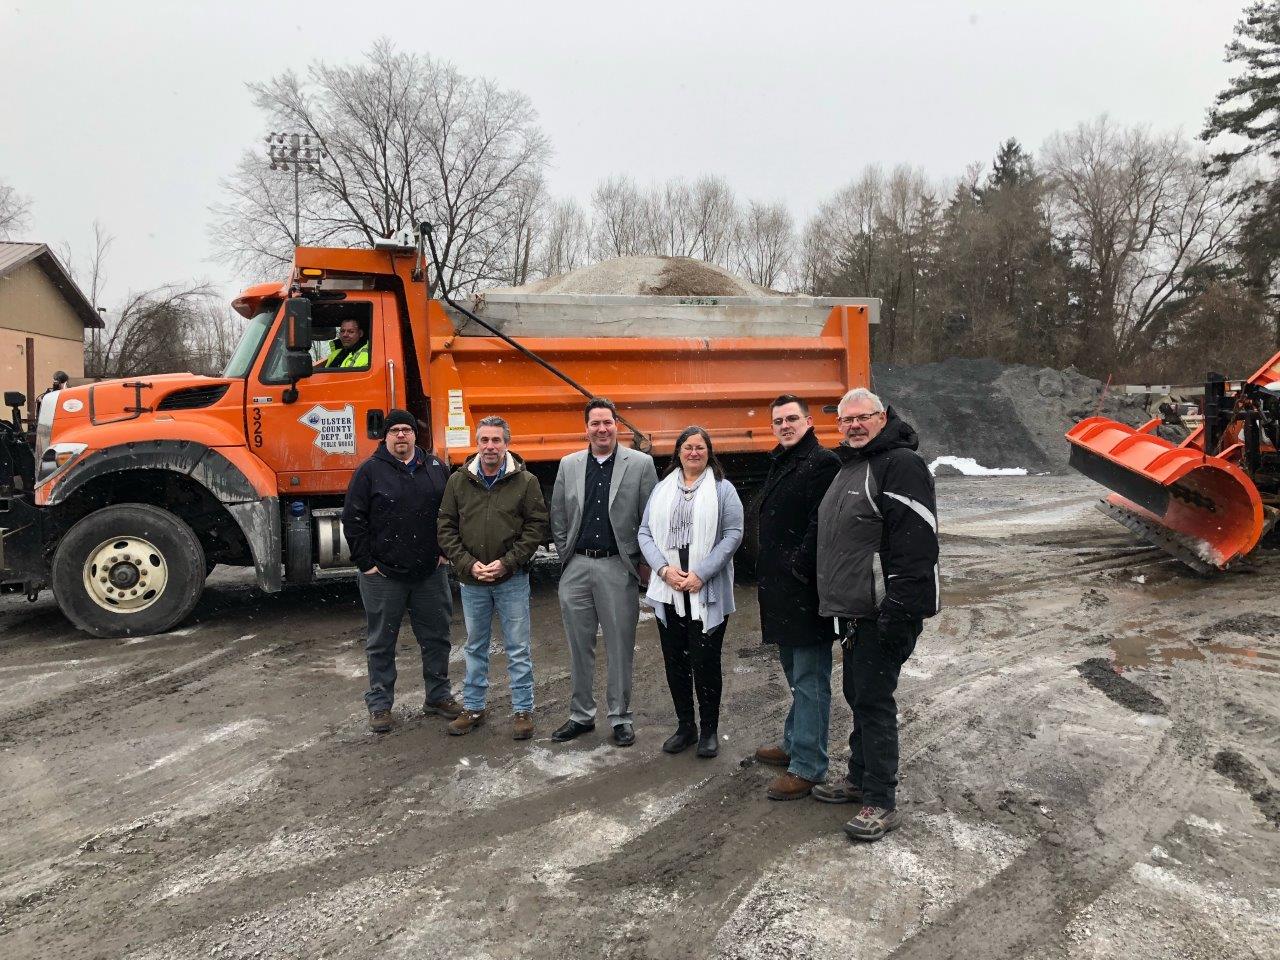 Acting County Executive Adele B. Reiter and Deputy County Executive Marc Rider with staff from the Ulster County Department of Public Works prior to commencement of winter operations on Tuesday morning.